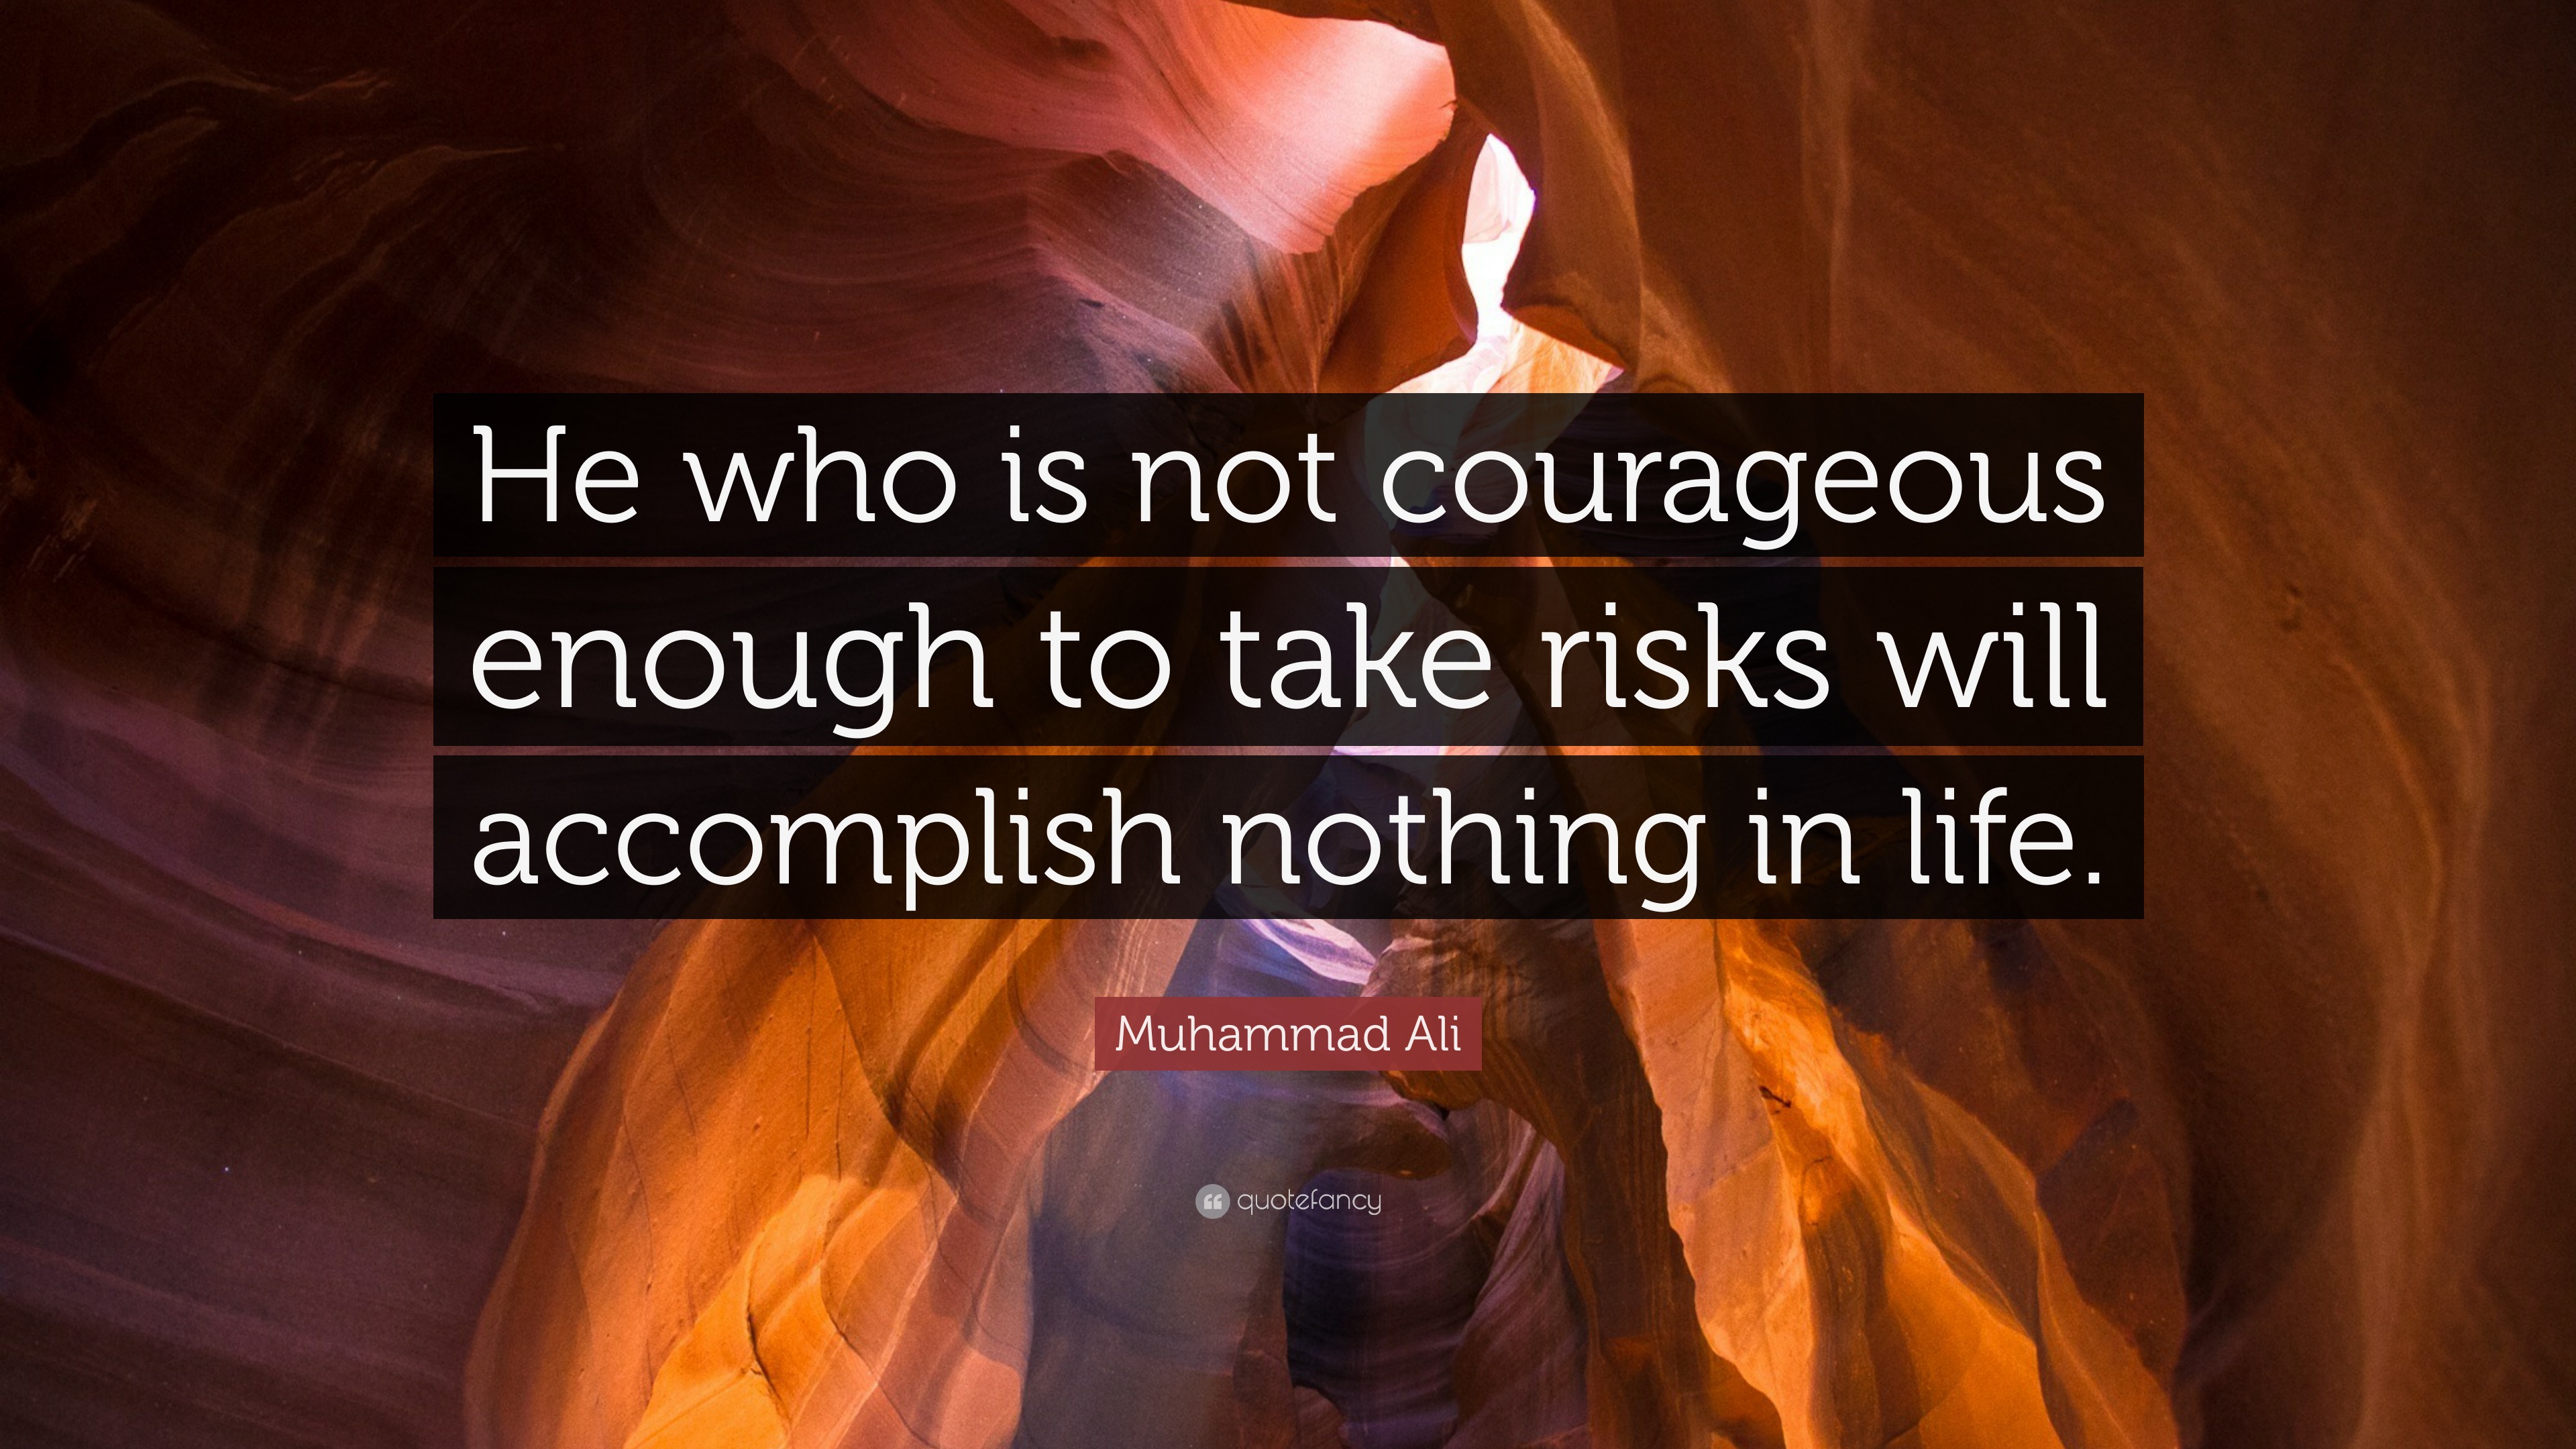 Muhammad Ali Quote: “He who is not courageous enough to take risks will